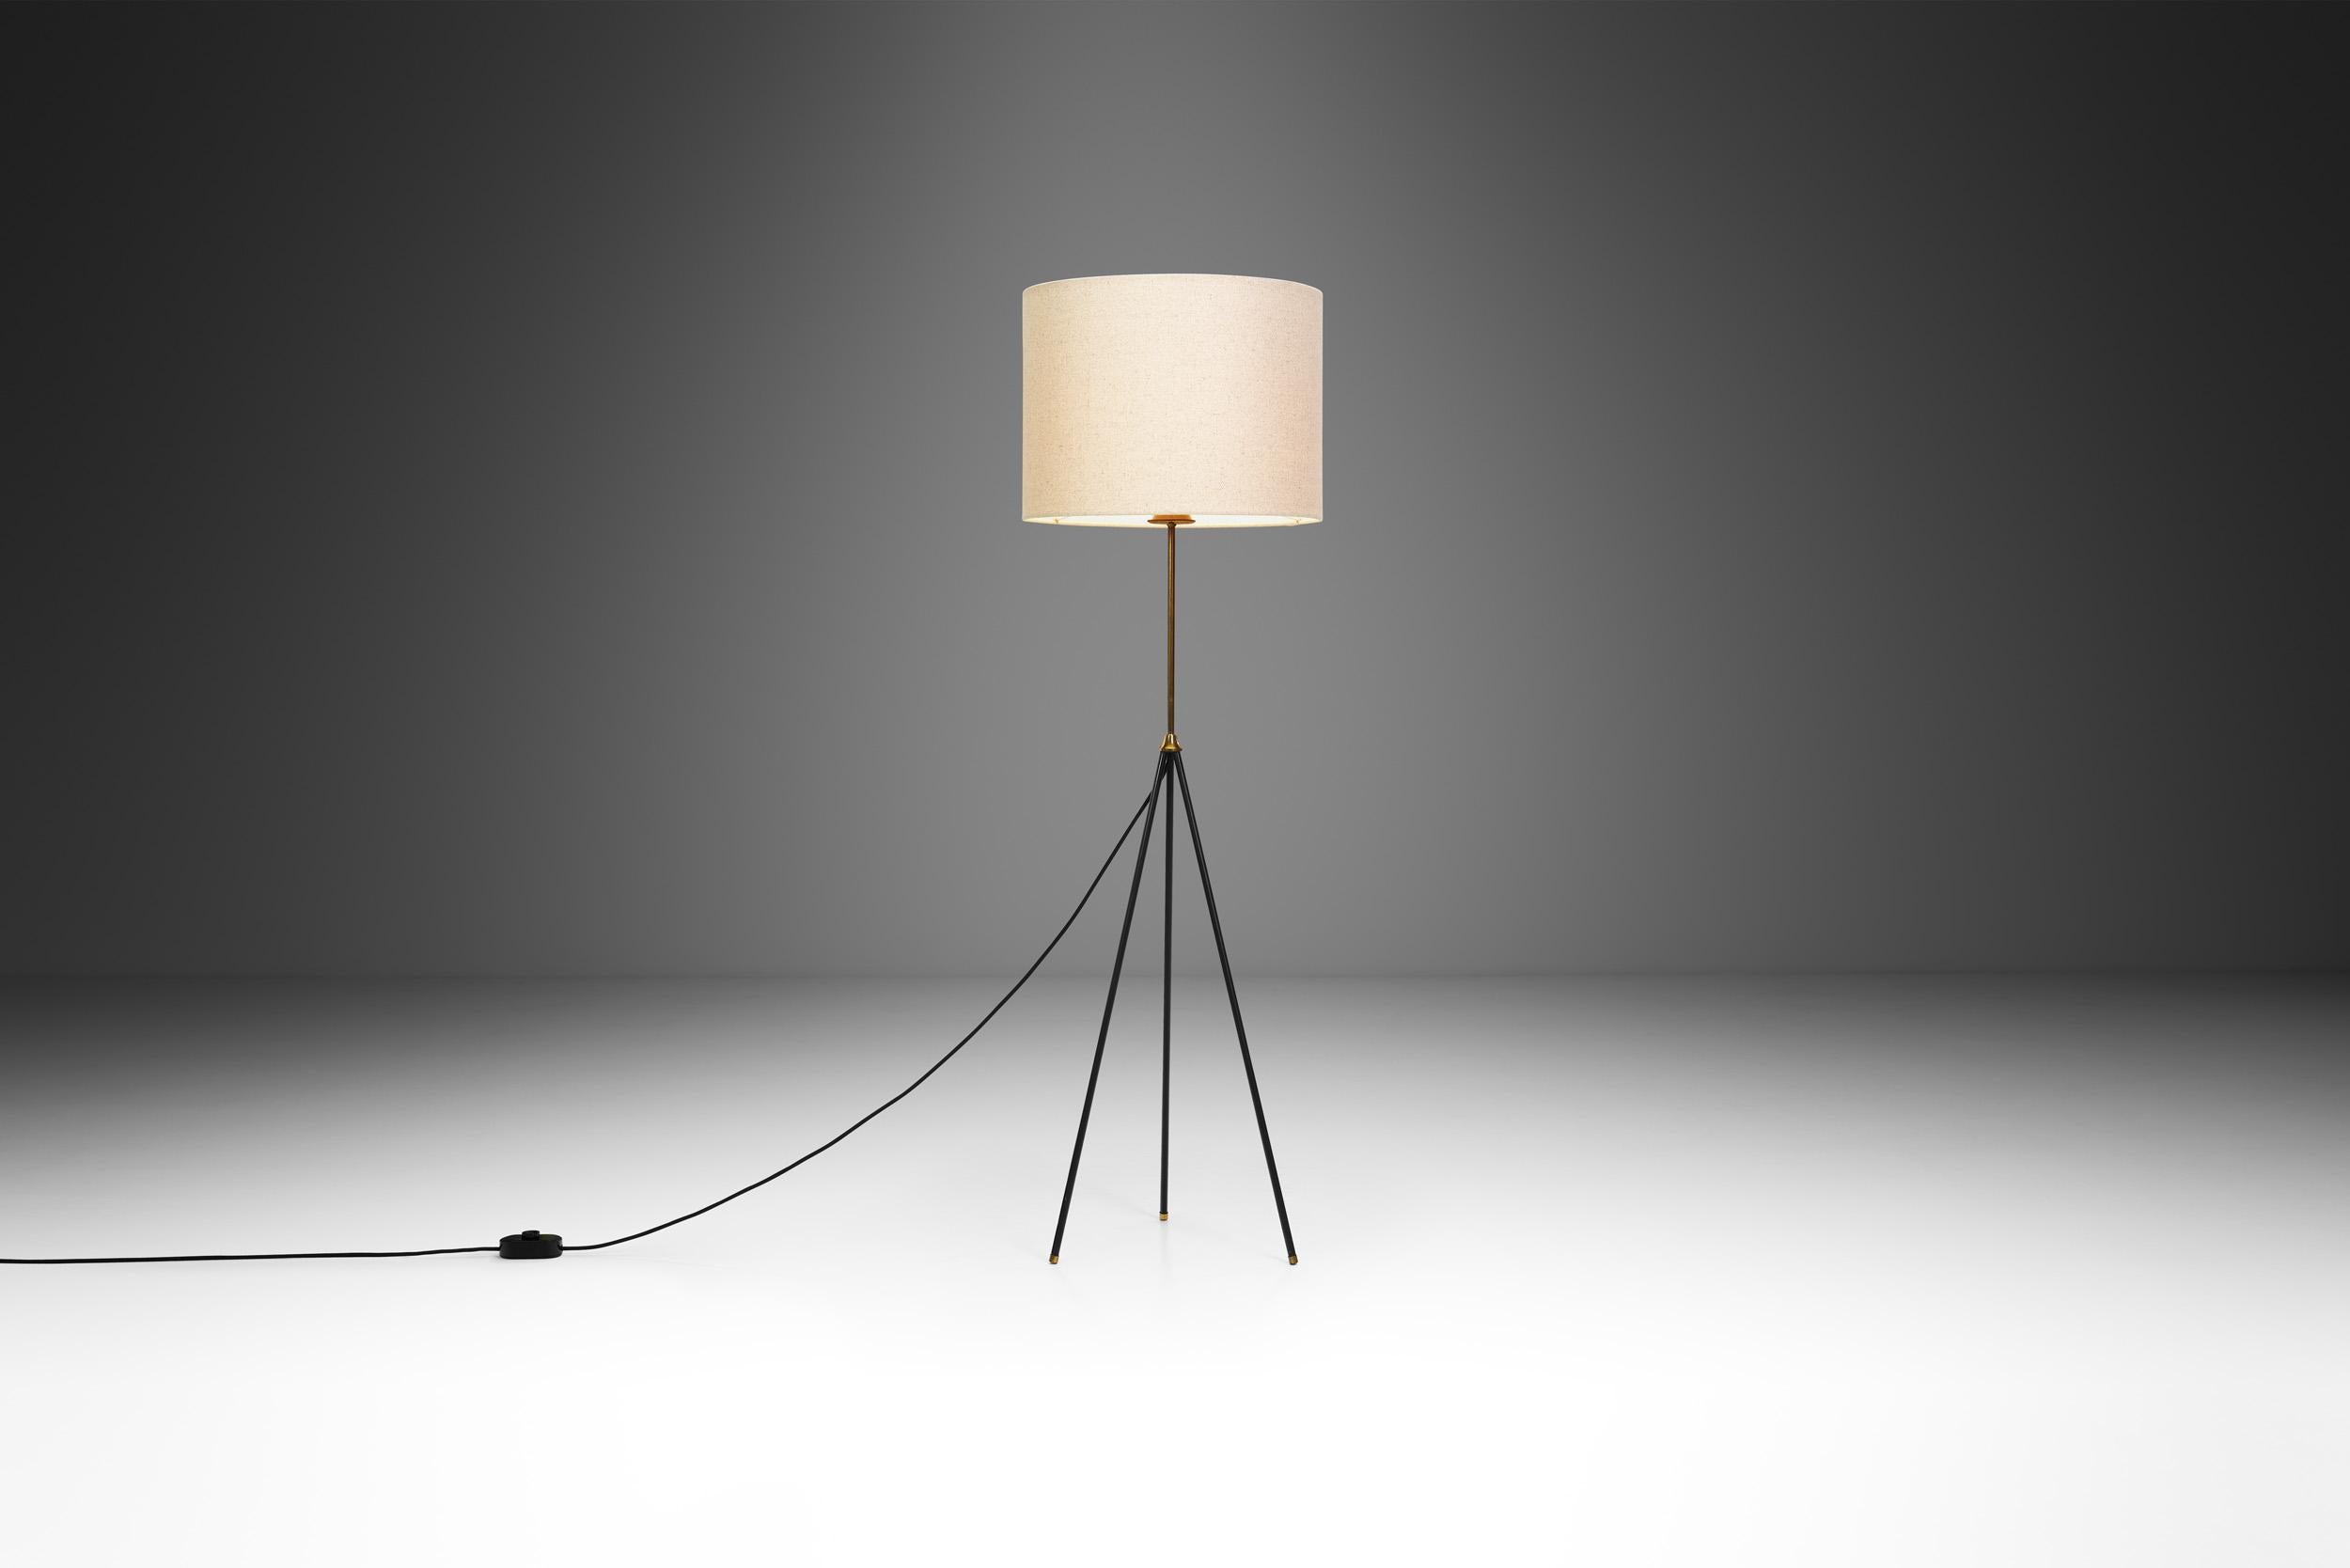 The mid-century era was marked by a departure from ornate, intricate designs and a shift towards simplicity, functionality, and a seamless blend of form and function. Evident with this floor lamp, mid-century lighting fixtures are characterized by